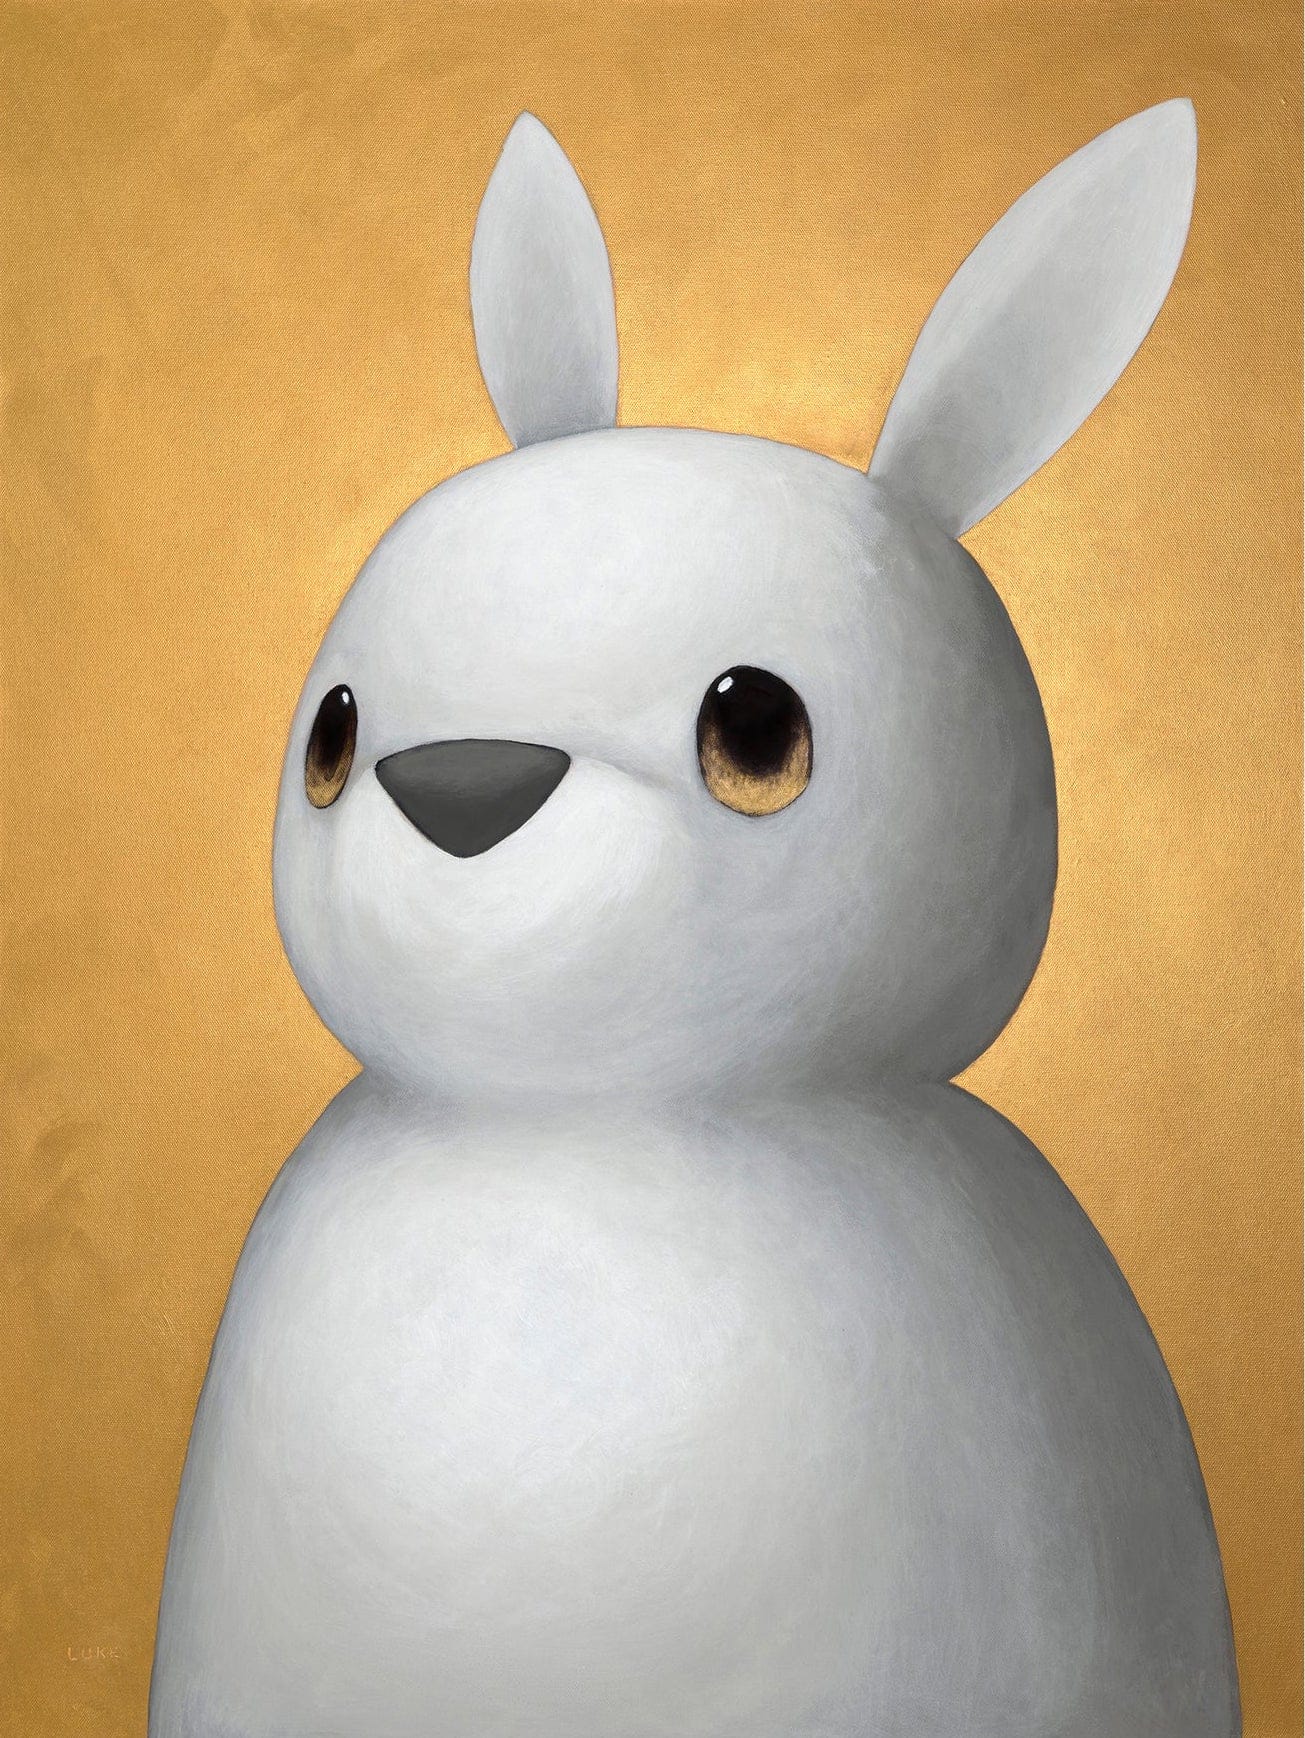 A portrait of a bunny against a golden yellow background.